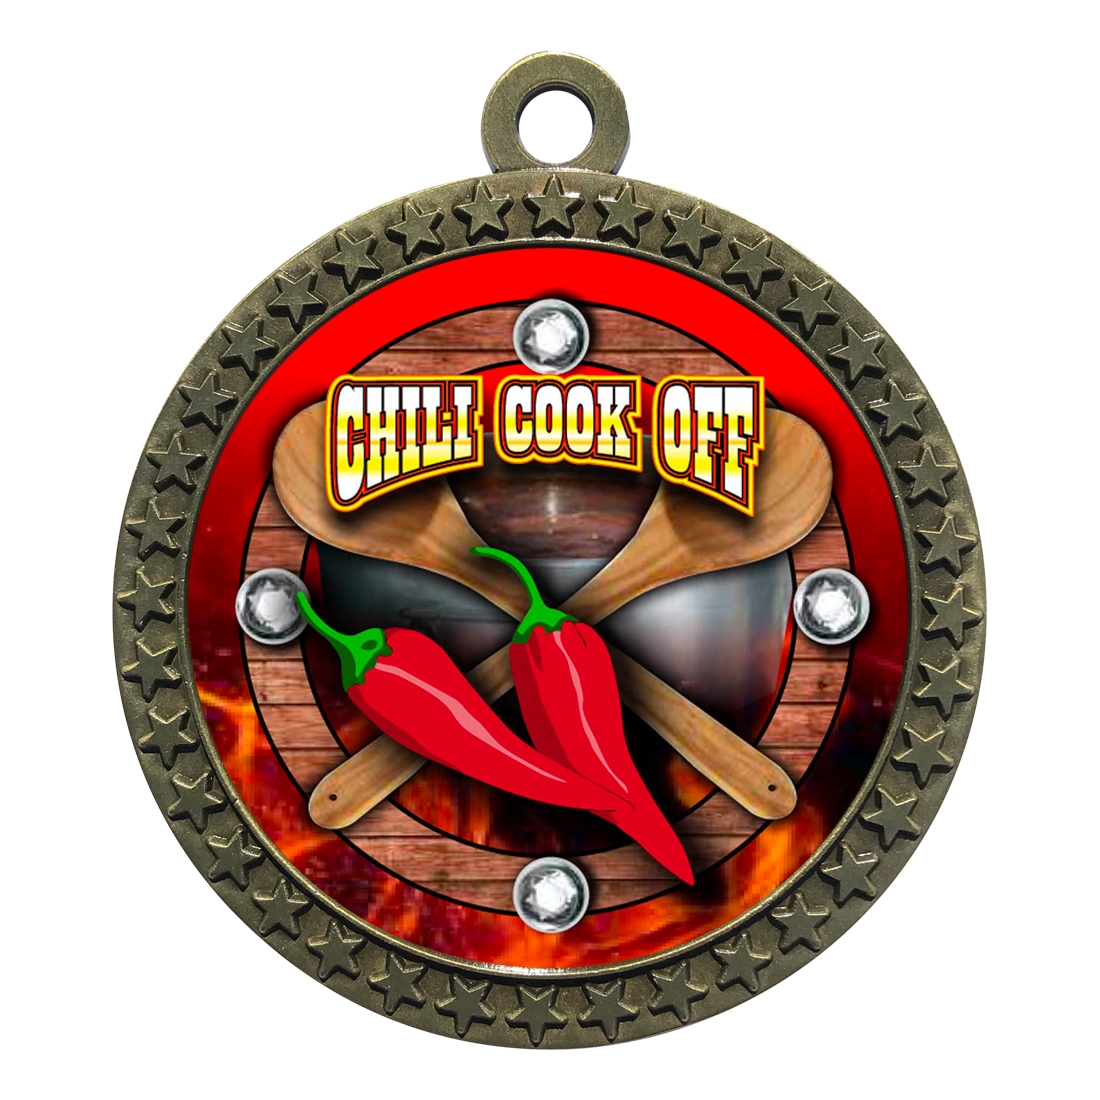 2-1/2" Chili Cook Off Medal